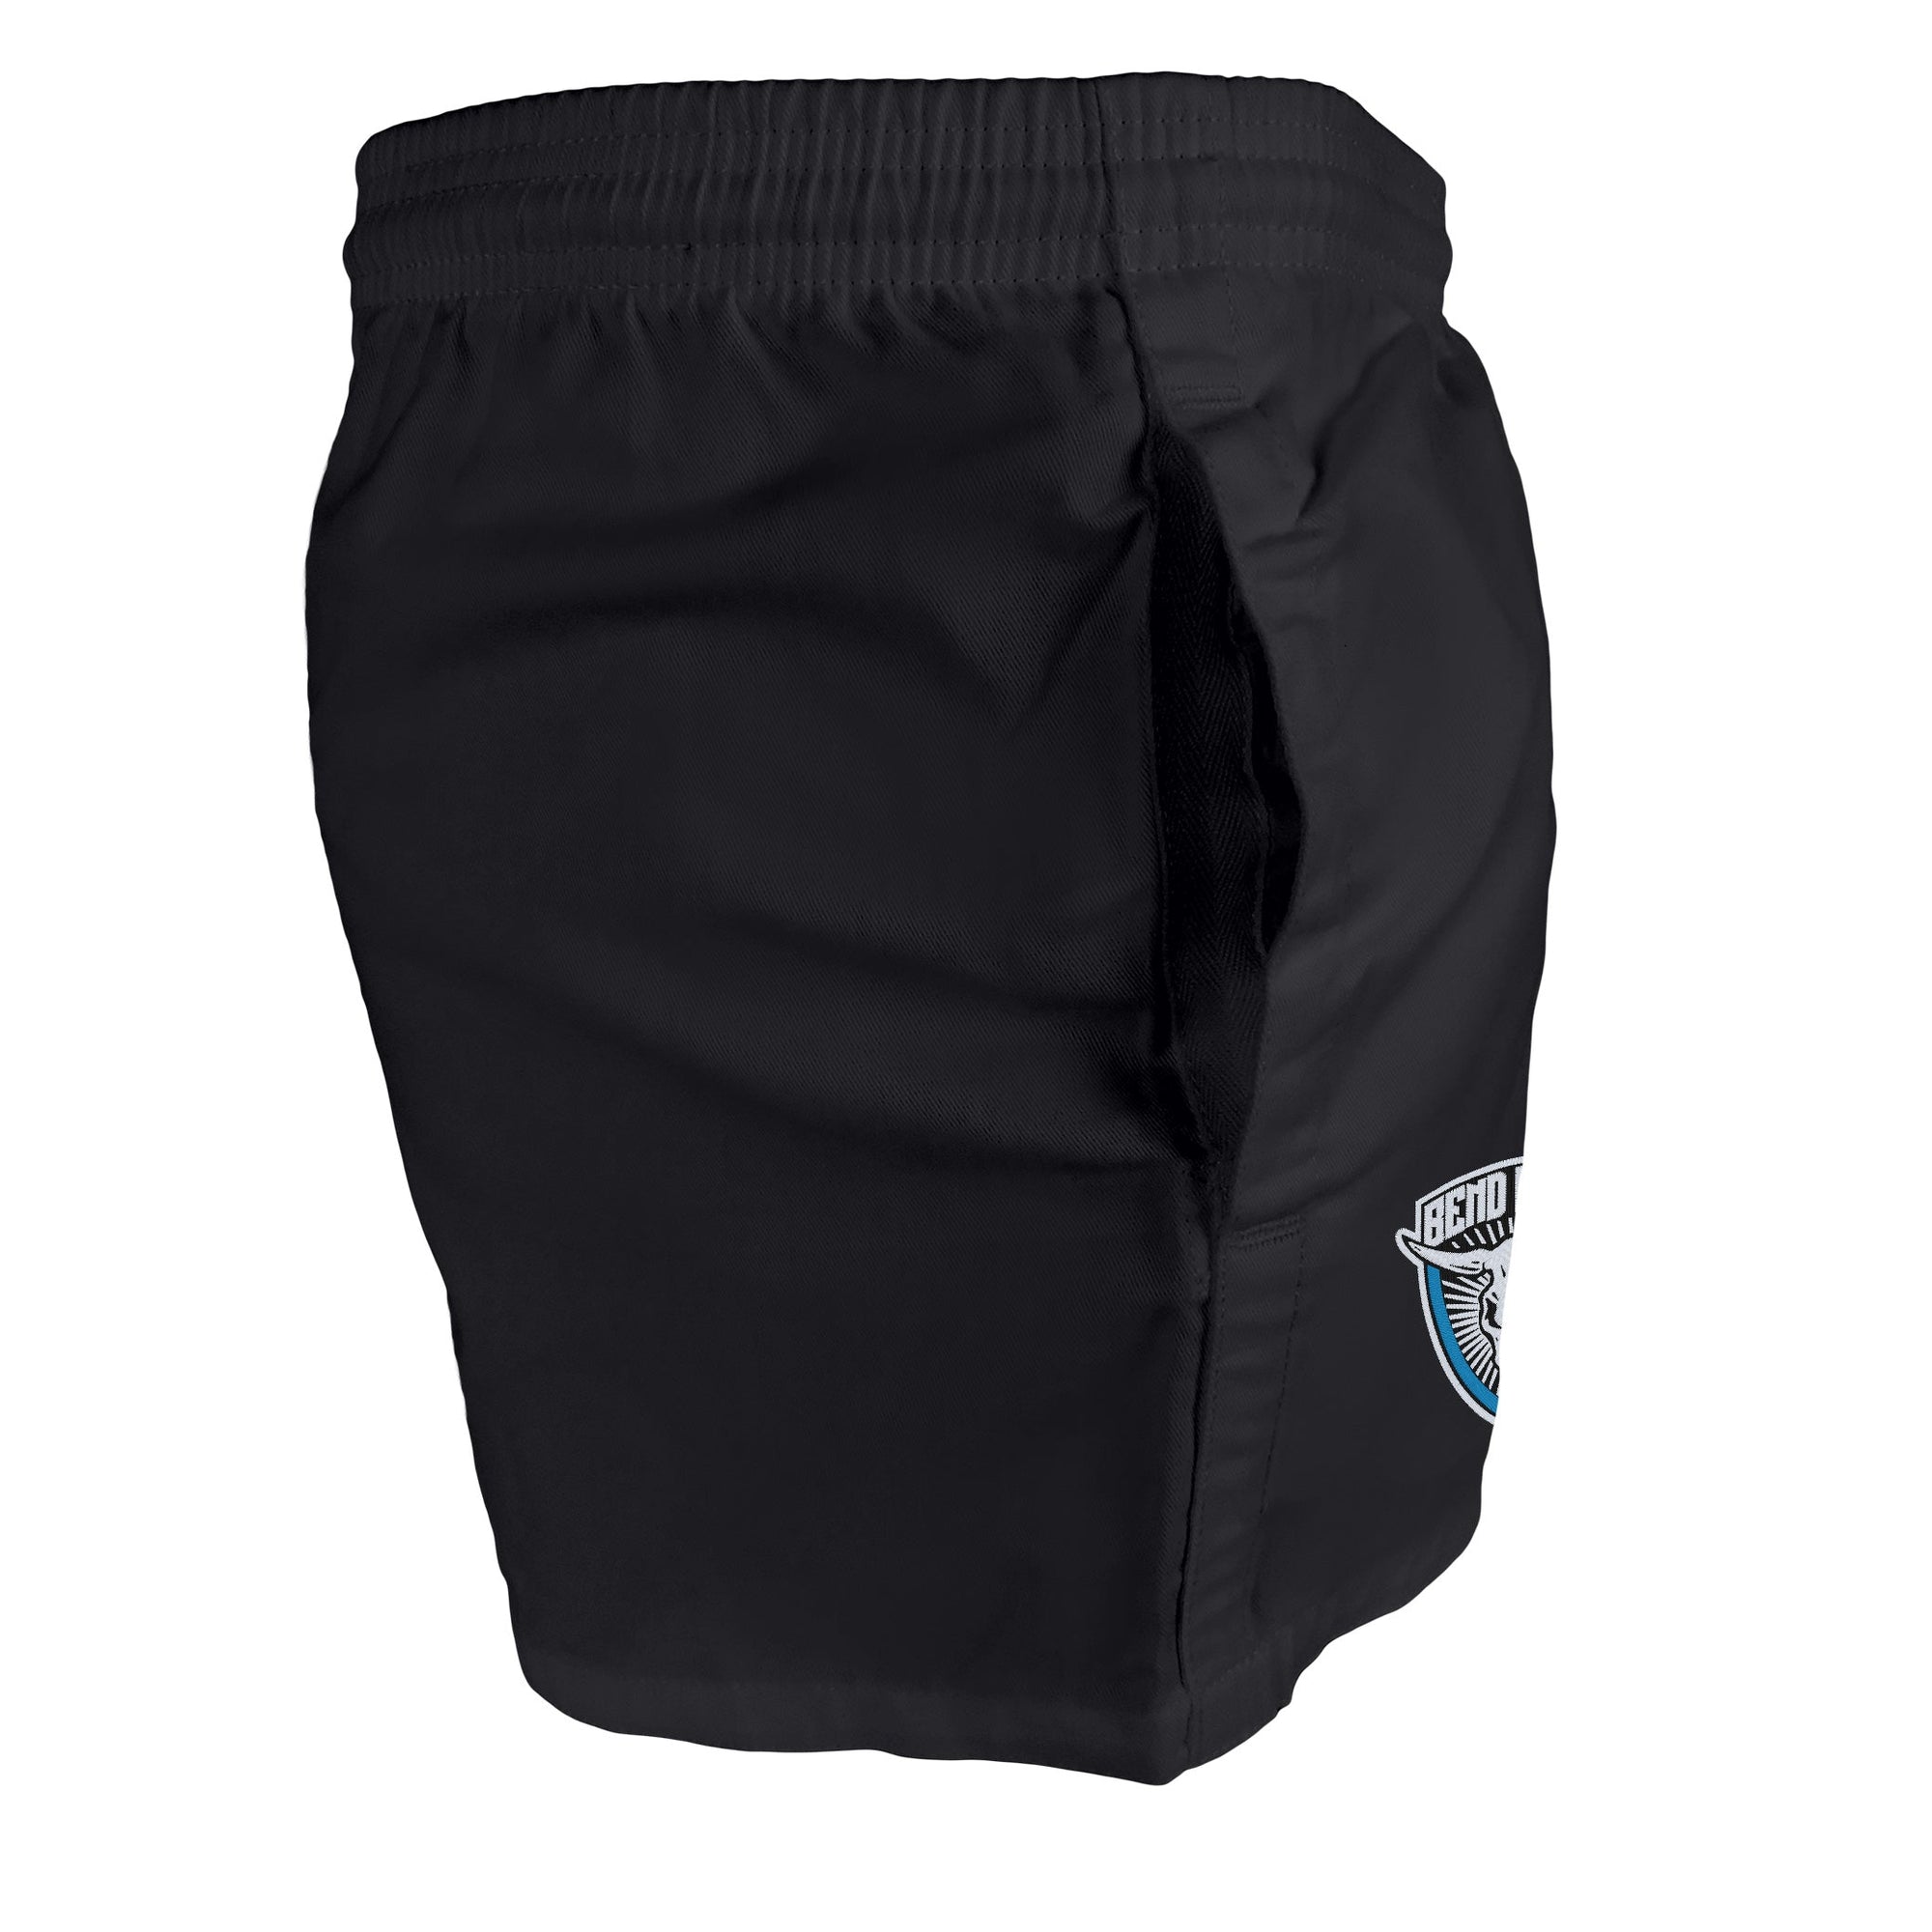 Rugby Imports Bend Rugby  Kiwi Pro Rugby Shorts